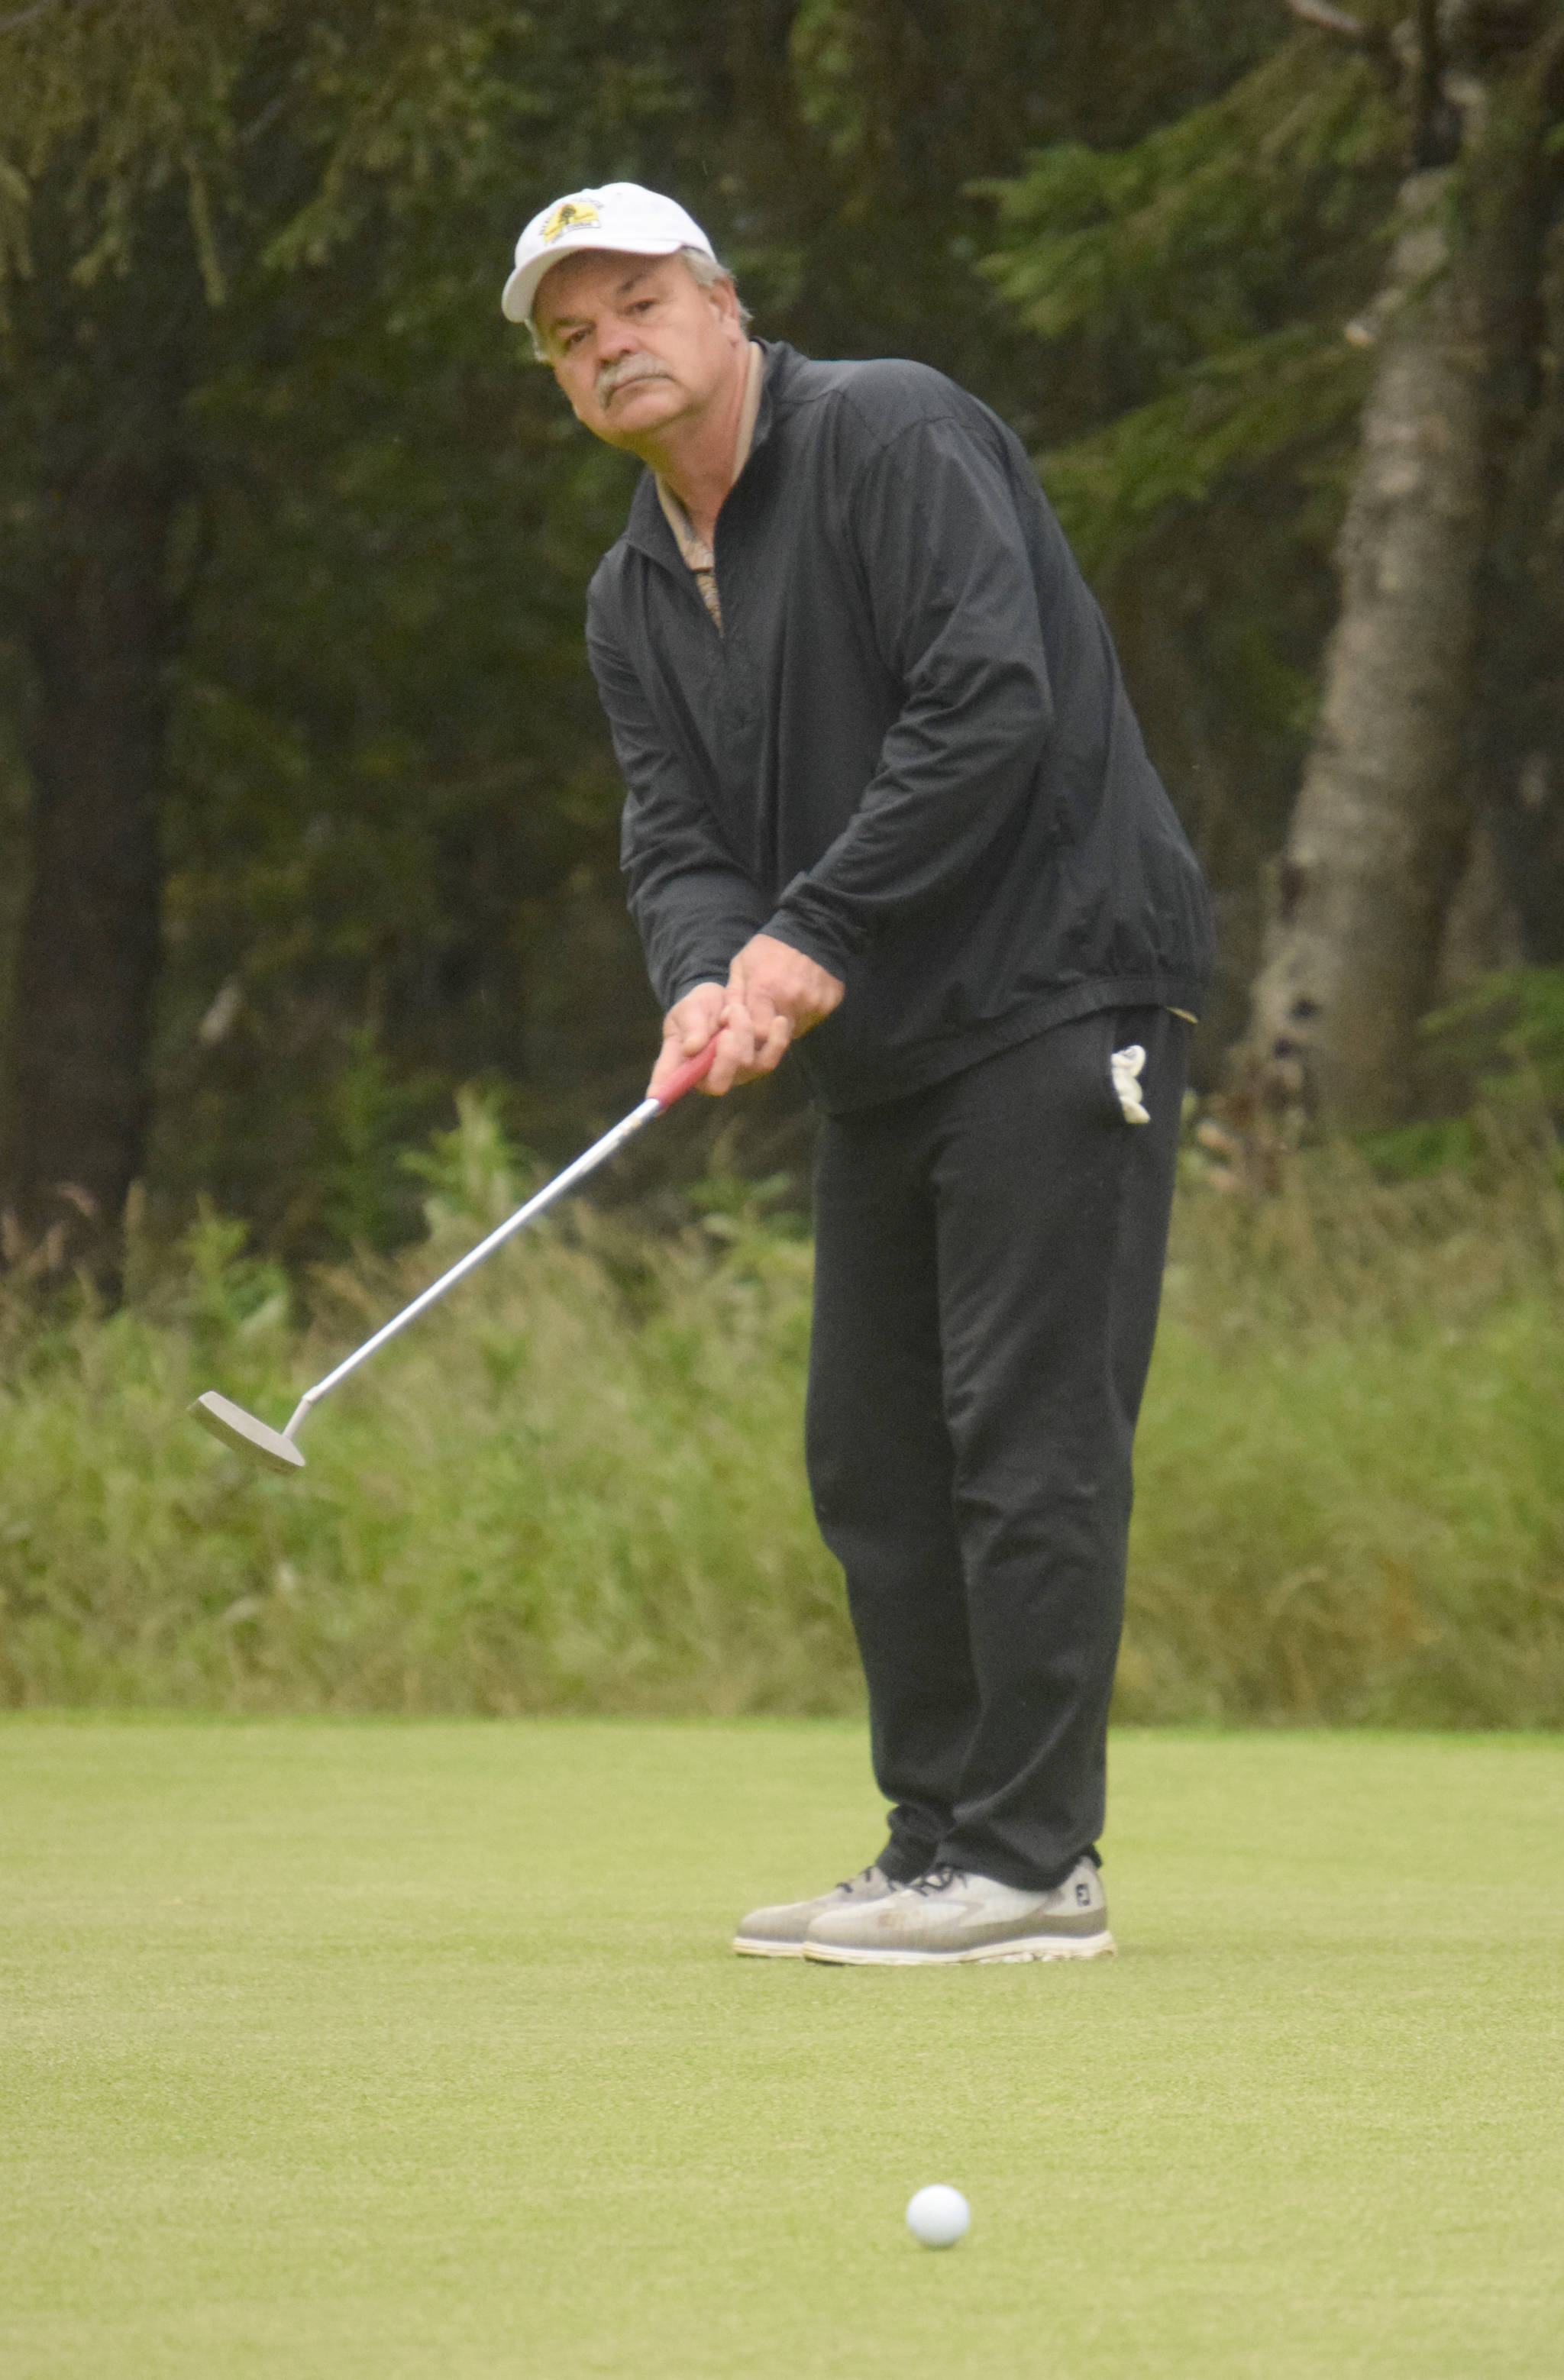 Birch Ridge’s Jeff Hetrick tracks his putt on the third green at Kenai Golf Course during the Peninsula Cup on Wednesday, Aug. 15, 2018. Hetrick dunked a hole-in-one on No. 10, his first shot of the tournament. (Photo by Jeff Helminiak/Peninsula Clarion)